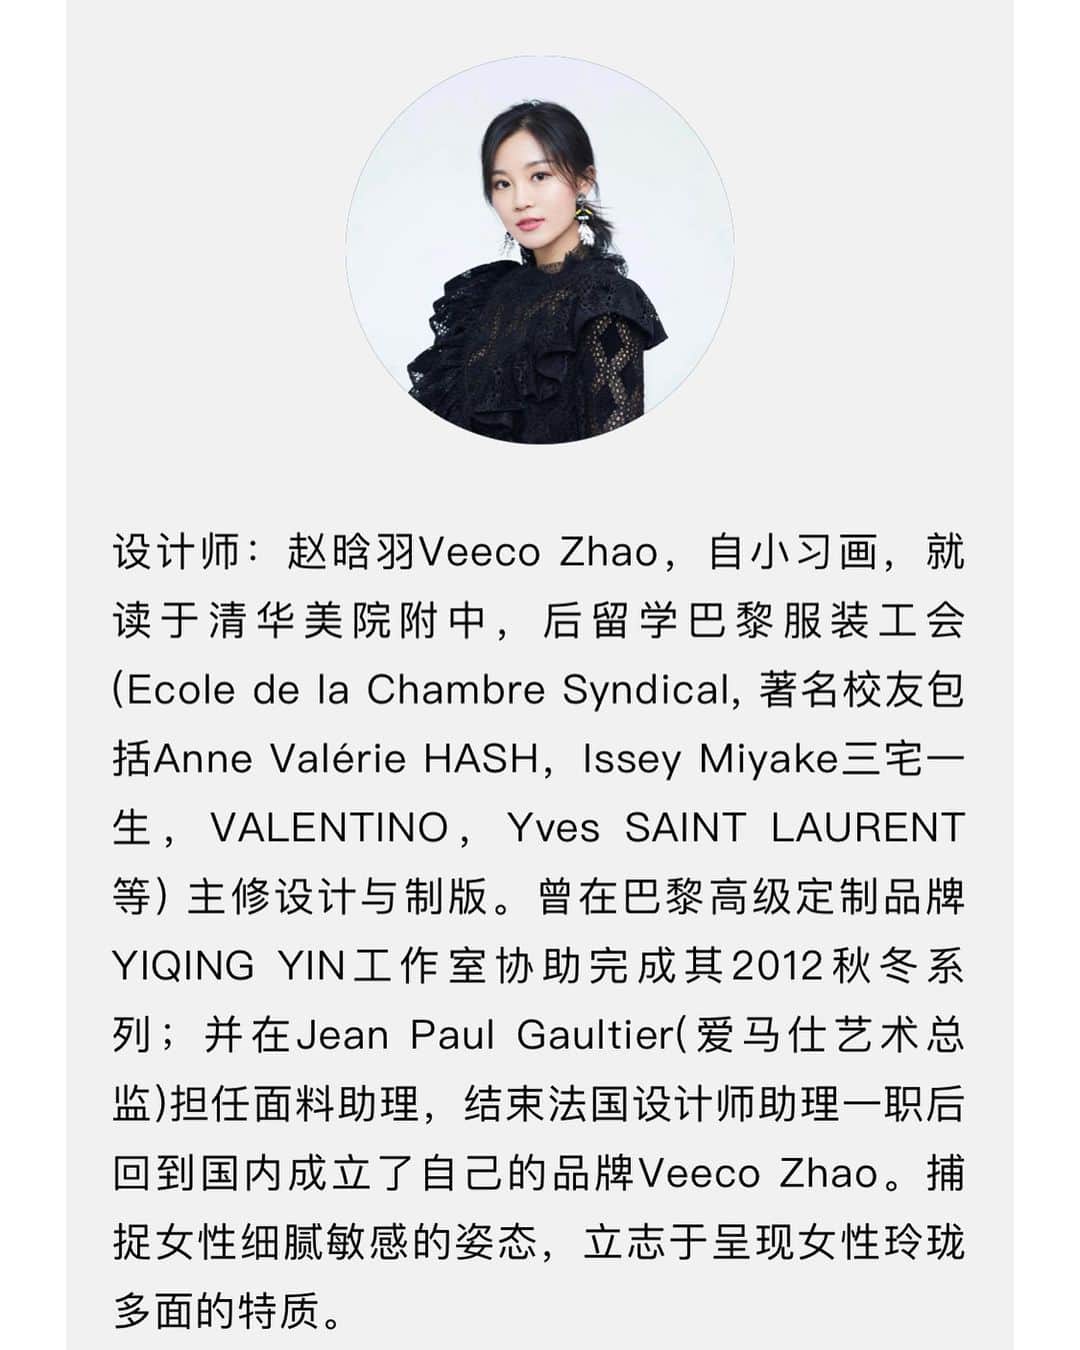 planticaさんのインスタグラム写真 - (planticaInstagram)「Zhao Hanyu, up-and-coming young Chinese fashion designer of “VEECO ZHAO”, unveiled the collaboration items with plantica at the Shanghai Fashion Week SS2021.﻿ ﻿ I am honored to contribute to the part of her VEECO ZHAO collection and delighted that she used plantica’s floral pattern on their textiles and has polished them up to a stunning high-fashion style.﻿ ﻿ I never imagined this floral print would look "elegant but cool" like this in a fashion show, but that's what VEECO ZHAO is all about👏Thank you a million, Zhao Hanyu and your wonderful team❣️﻿ ﻿ If you all have your weibo account, please follow her account "Veeco赵晗羽" and her official brand account "VEECOSTUDIO" to see many collection archive.﻿ ﻿ *Below is the excerpt from an article on VOGUE China.﻿ -﻿ "Restore the reality in dreams, and capture the phantoms of reality in reality." This is the designer Zhao Hanyu’s most direct experience of the animation "The House of No Ma". This surreal movie has always been the inspiration for the designer Zhao Hanyu’s design. Jin Min's extreme style, the plot and paradoxical atmosphere of the girl idol, bring a different sweet dark image in the new 2021 spring and summer series.﻿ ﻿ The most commonly used flowers as a symbol of beauty have spread throughout the series in different forms such as prints, dark patterns, and hollow perspectives. VEECO ZHAO specially invited to the famous Japanese floral design brand plantica. This artistic team that uses flowers as a medium to bring vivid beauty into different fields, this time also presents a different kind of romance for the entire series, revealing it in untouchable perfection The fuzzy fantasy world of reality and dream.﻿ ﻿ -﻿ 每一個夢都是黑洞，沒有盡頭，夢境中所有具像化的事物帶著幾分怪藏卻又帶著致命的吸引力，即使深知處於夢境之中，我們仍被該死的好奇心推動前行，去窺探那一頭的結局。想要知道的或許不是夢境發展，而是關於自己潛藏在這個幻境的中另一面。﻿ ﻿ 這一季VEECO ZHAO打破過去的溫柔，以黑色作為基調，配襯千草色、桃粉、藤紫和雛菊黃等清新色系點亮其中，伴隨雲朵般飄蕩夜空的奶油白色，構築出不同以往的夏夜夢境。薄紗依舊貫穿2021春夏系列，豐盈整體輪廓同時保持了飄逸靈動的視覺效果，在不同廓形的多樣運用中兼具了實用性，也給予了春夏更多的穿搭可能。﻿ ﻿ 最常用做美好象徵的花朵，以印花、暗紋、鏤空透視等不同形態蔓延了整個系列。VEECO ZHAO特別邀請來日本著名花藝設計品牌plantica，這個將花卉作為媒介把鮮活的美帶入不同領域的藝術團隊，這次也為整個系列呈現了別樣浪漫，在不可觸碰的完美中透露著現實與夢境的模糊幻界。﻿ ﻿ -﻿ #plantica #プランティカ　﻿」11月30日 13時30分 - plantica_jp